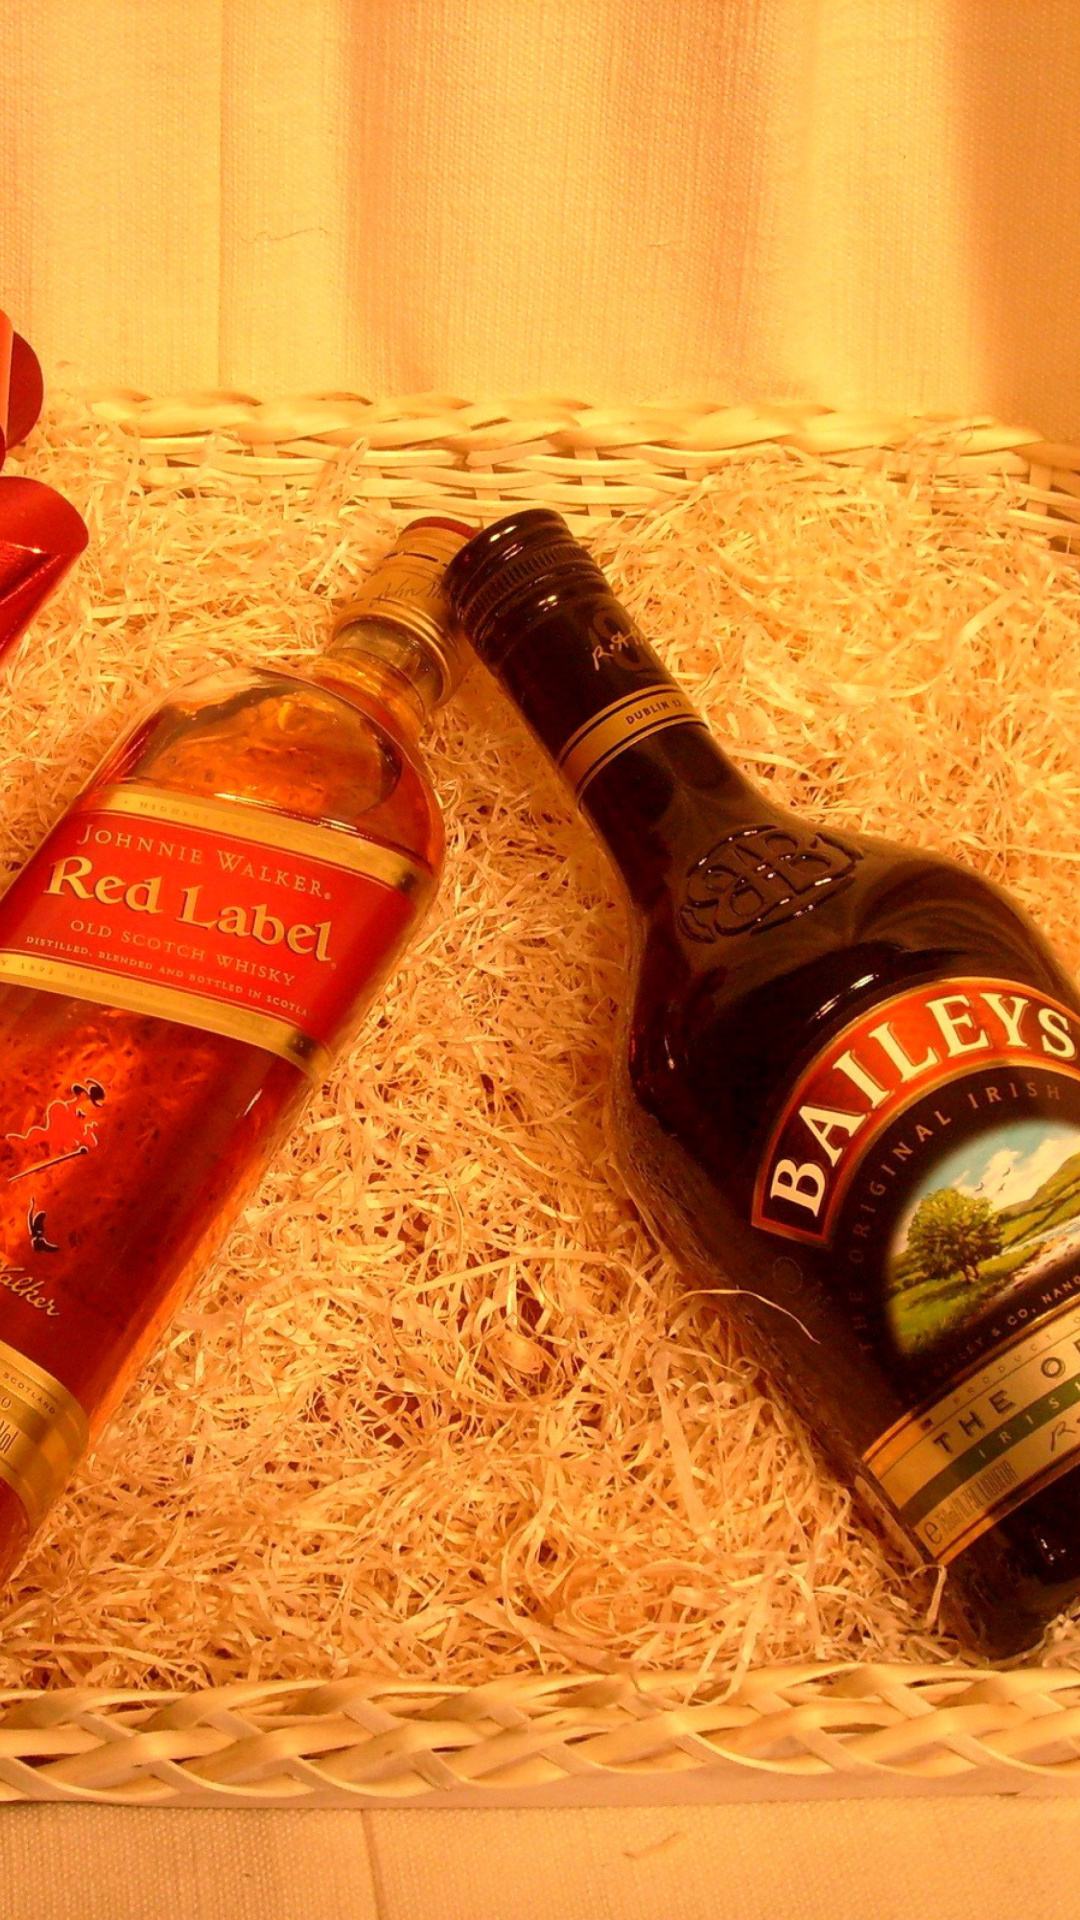 Baileys and Red Label wallpaper 1080x1920